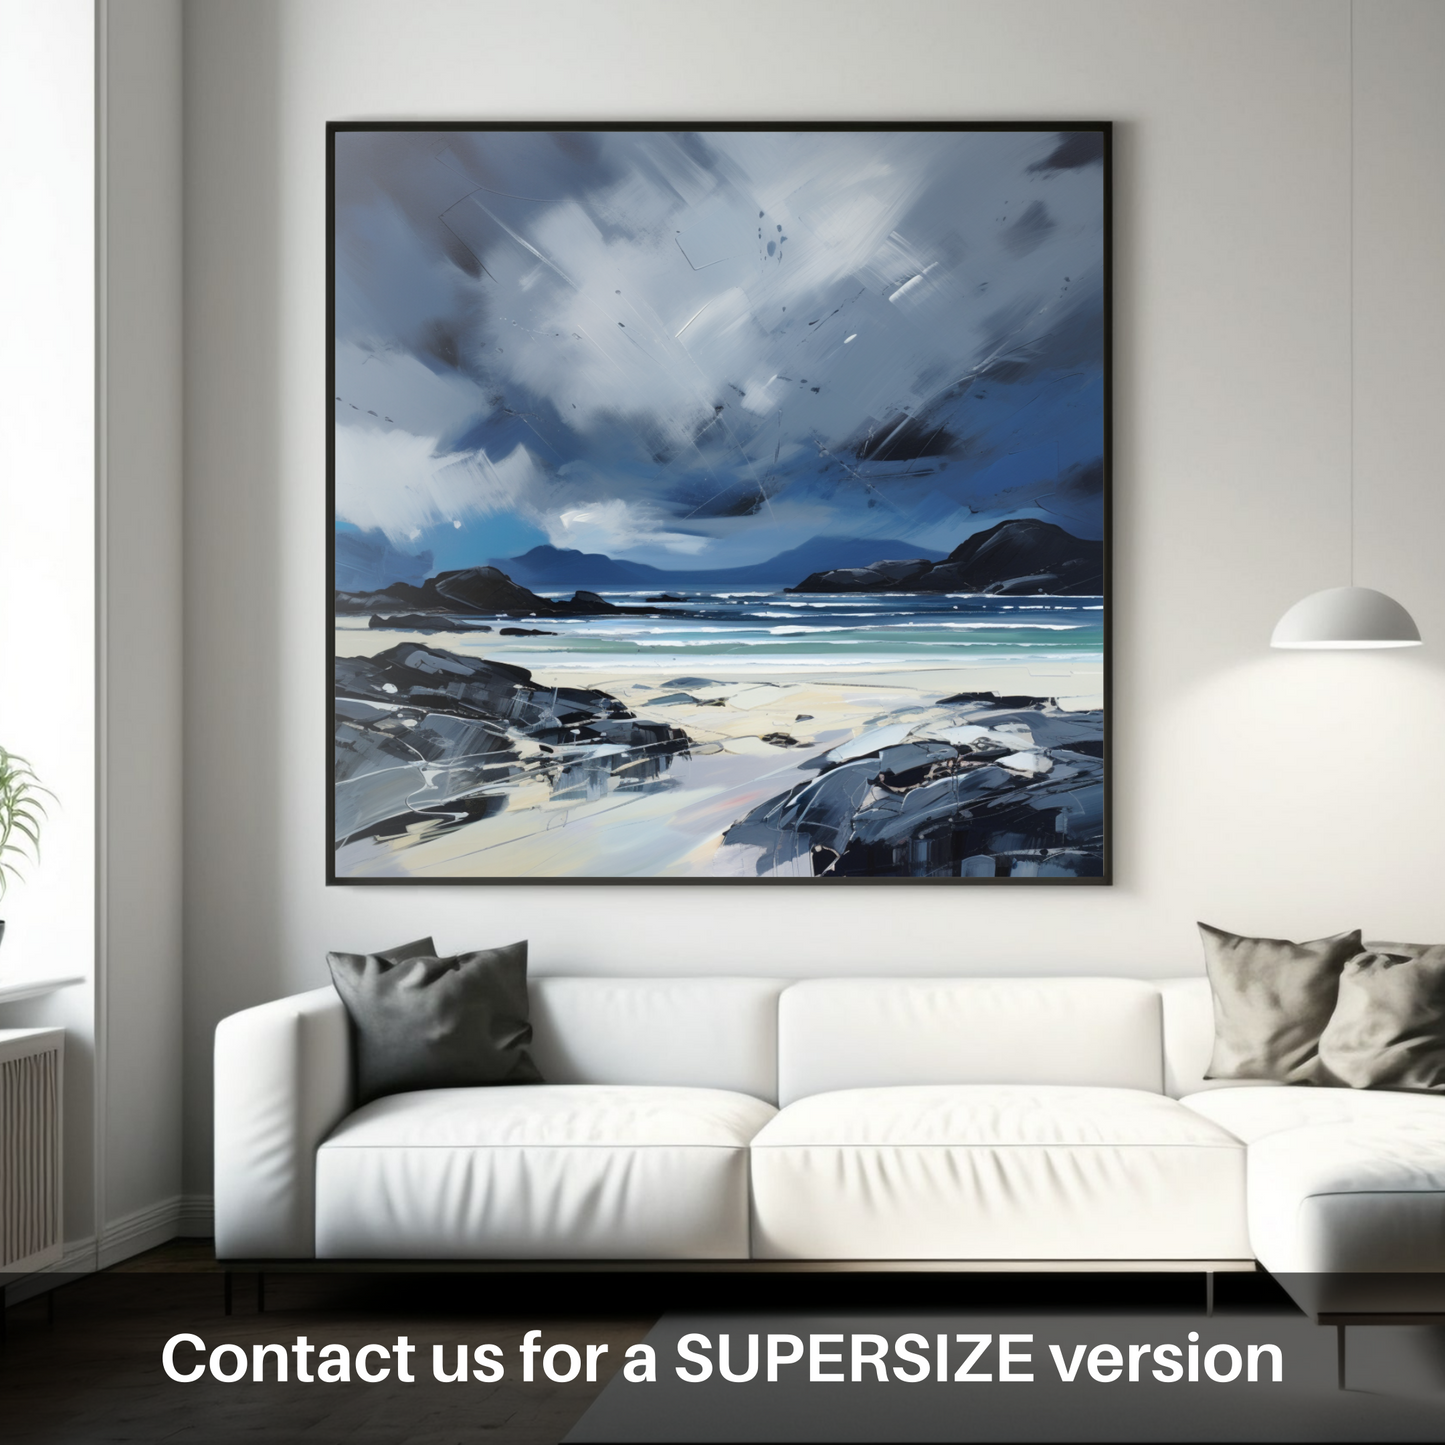 Huge supersize print of Mellon Udrigle Beach with a stormy sky